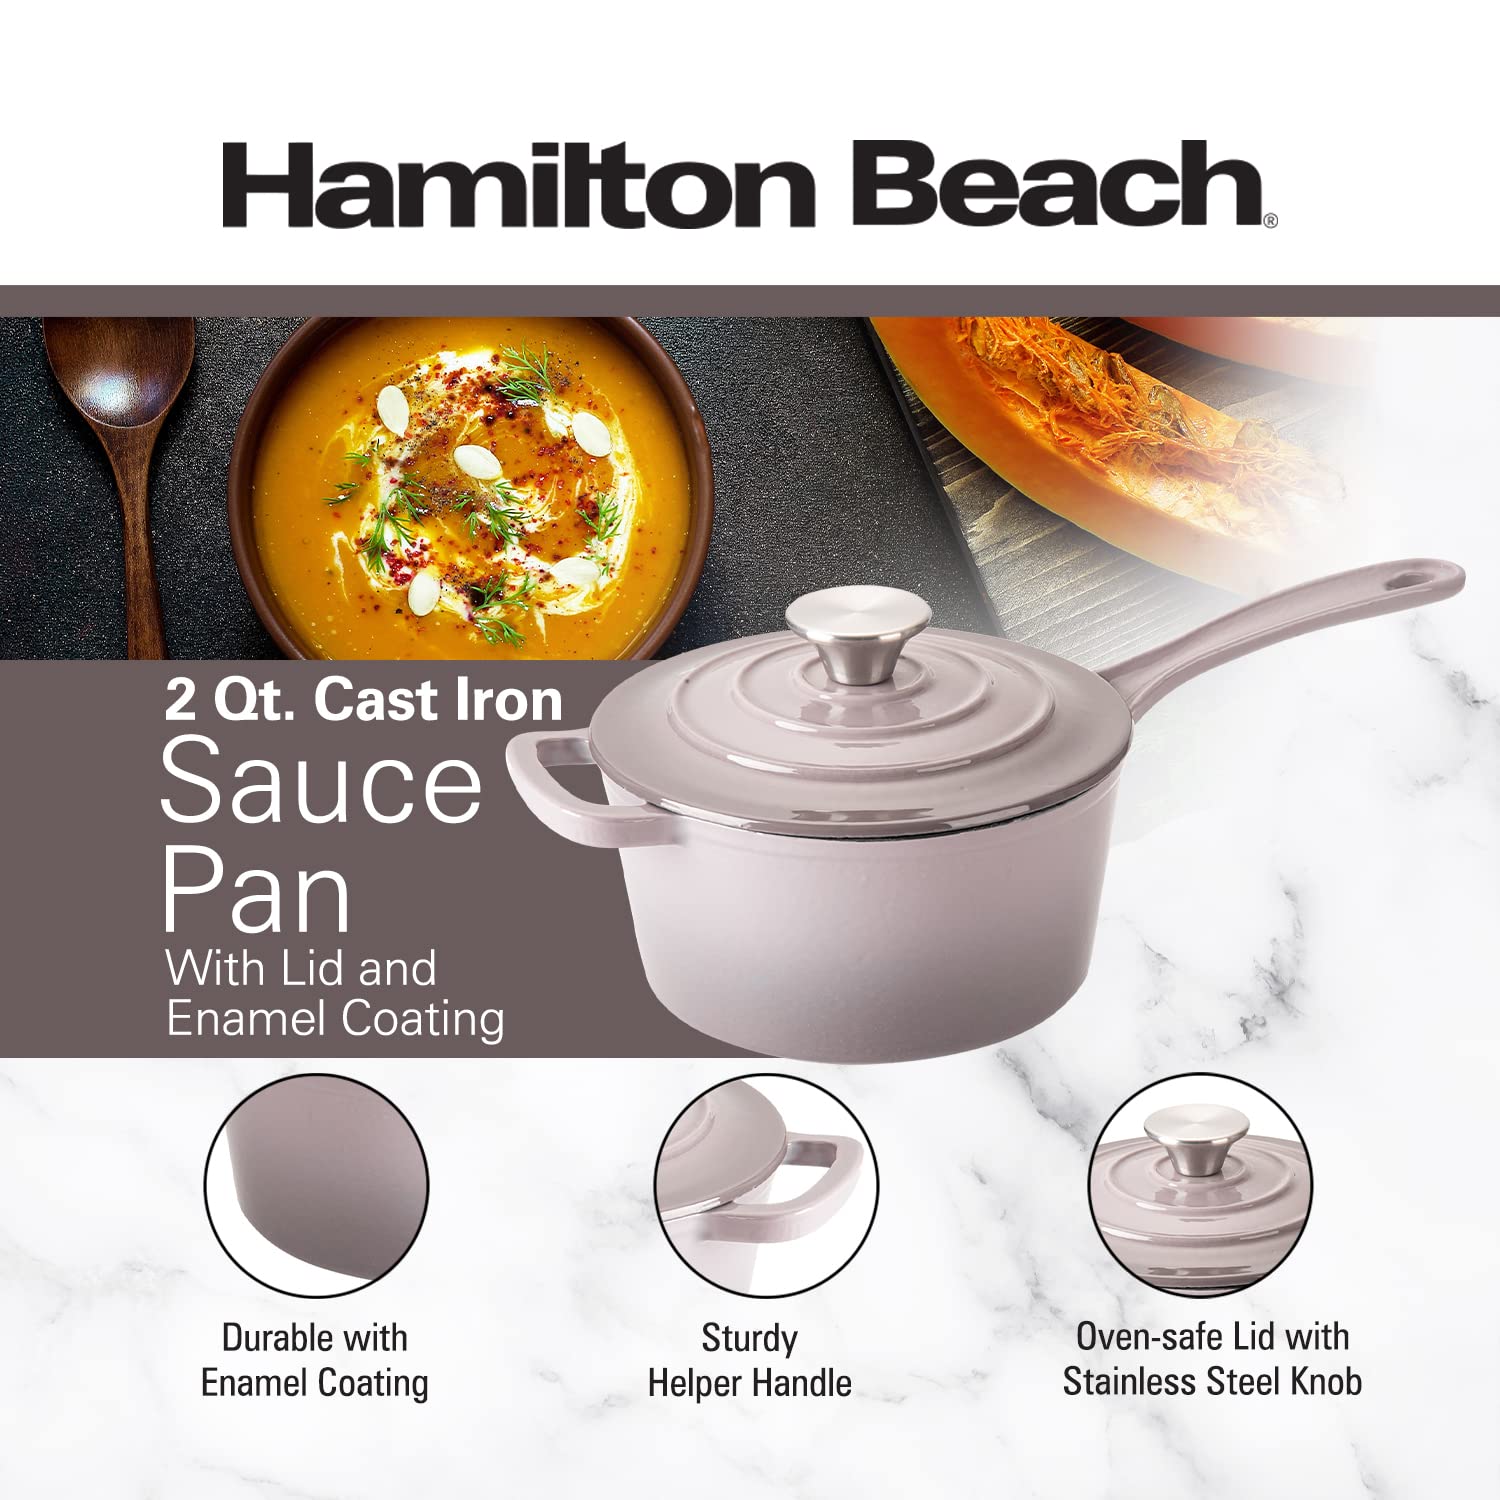 Hamilton Beach Enameled Cast Iron Sauce Pan 2-Quart Navy, Cream Enamel coating, Pot For Stove top and Oven Cooking, Even Heat Distribution, Safe Up to 400 Degrees, Durable